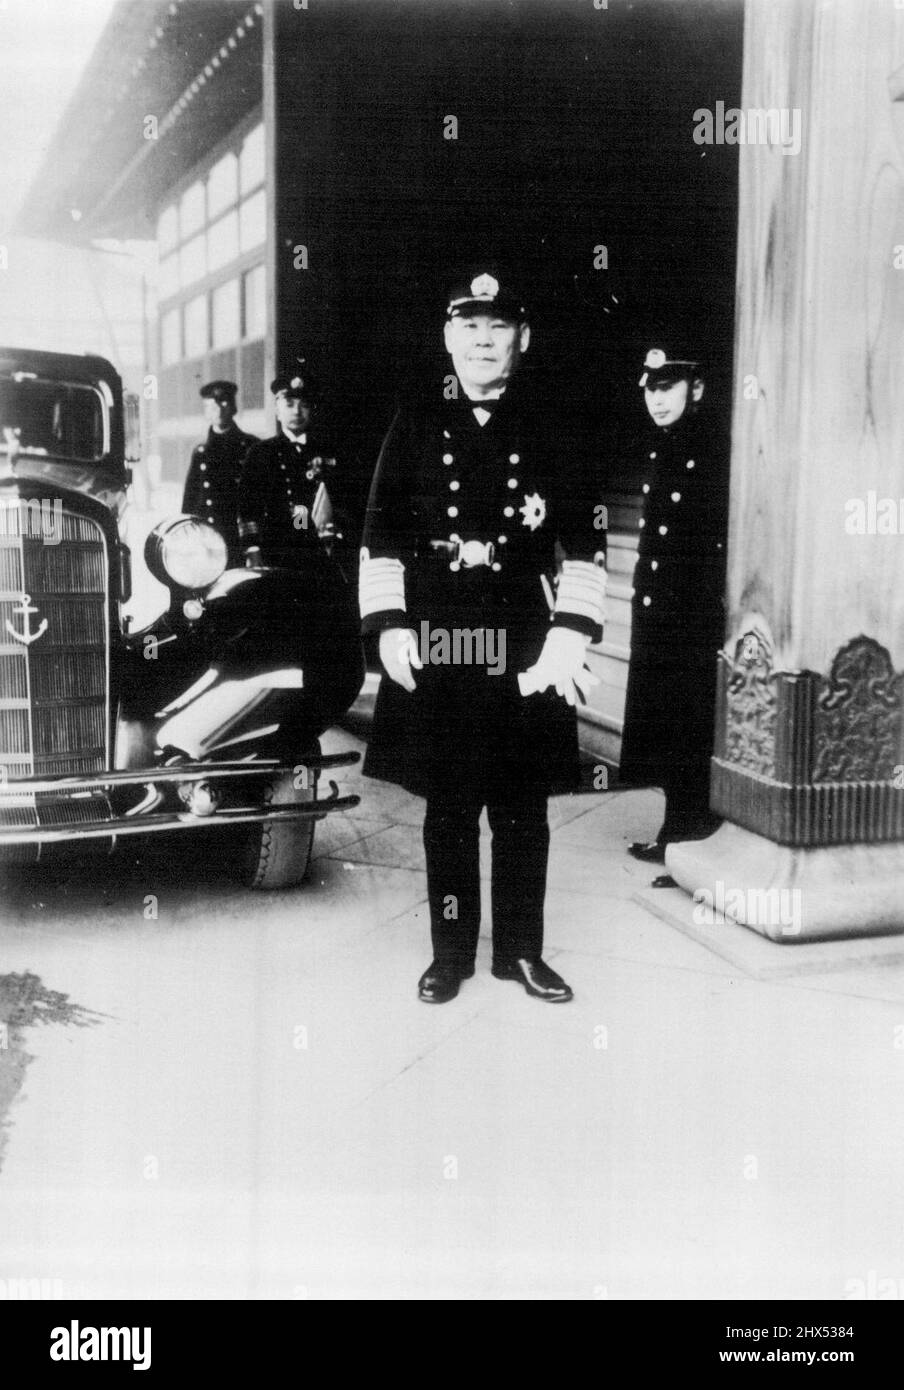 Admiral Shushin Nagano who was newly appointed the Navy Minister open his arrival in Tokyo from London where he had been the Japanese envoy to the world disarmament conference. Photo shows the Admiral leaving the imperial Palace after his report to the throne on cireumstances in the conference. May 25, 1936. (Photo by Japan Press Illustrating Service). Stock Photo